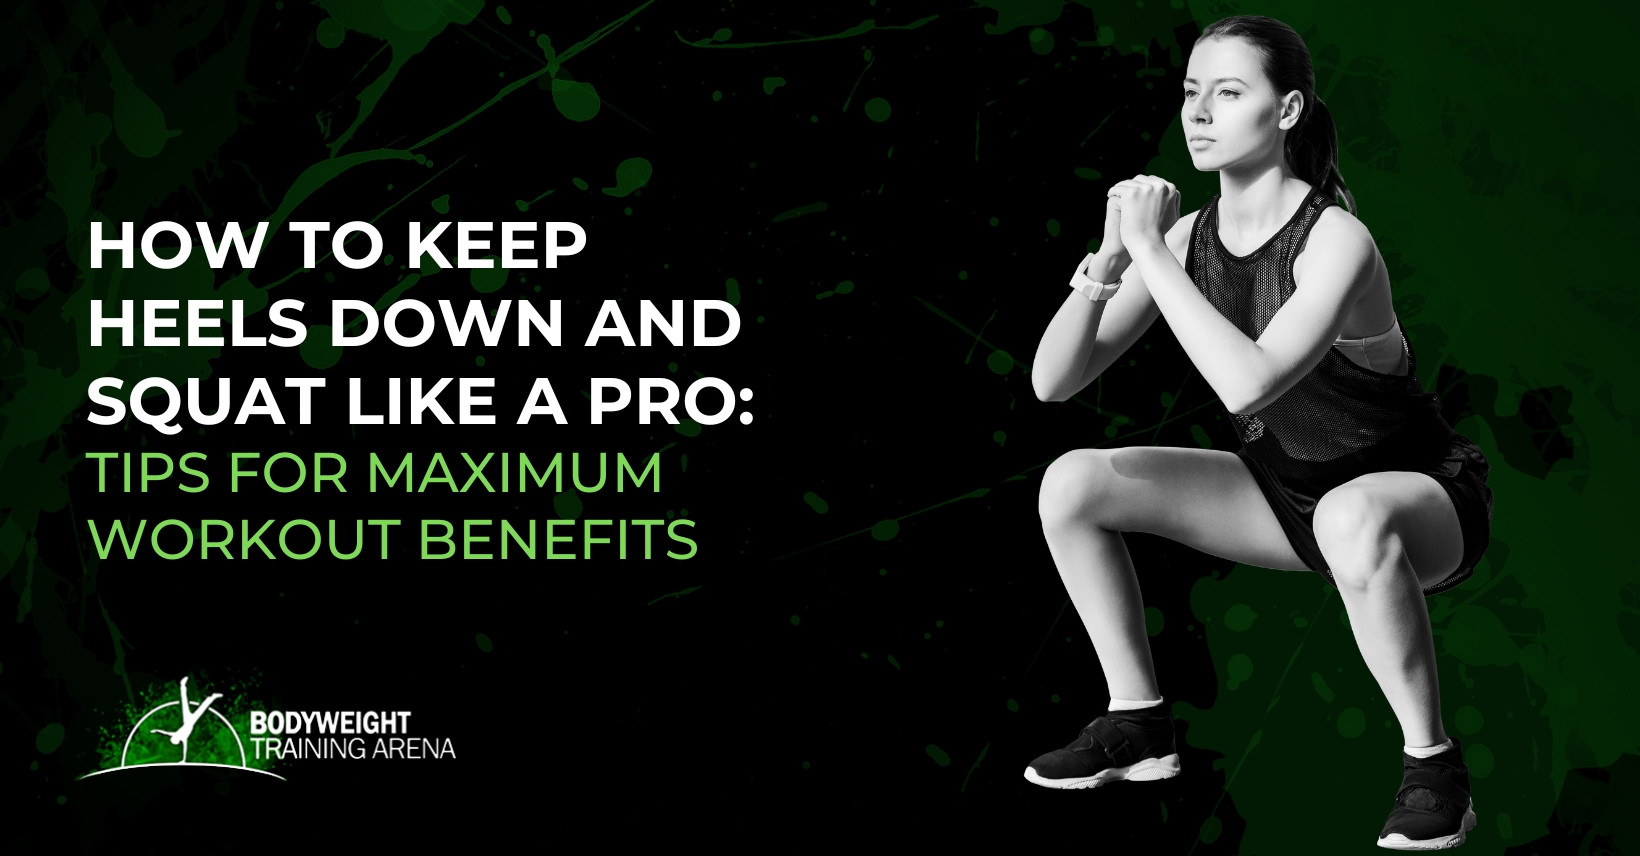 How_to_Keep_Heels_Down_and_Squat_Like_a_Pro